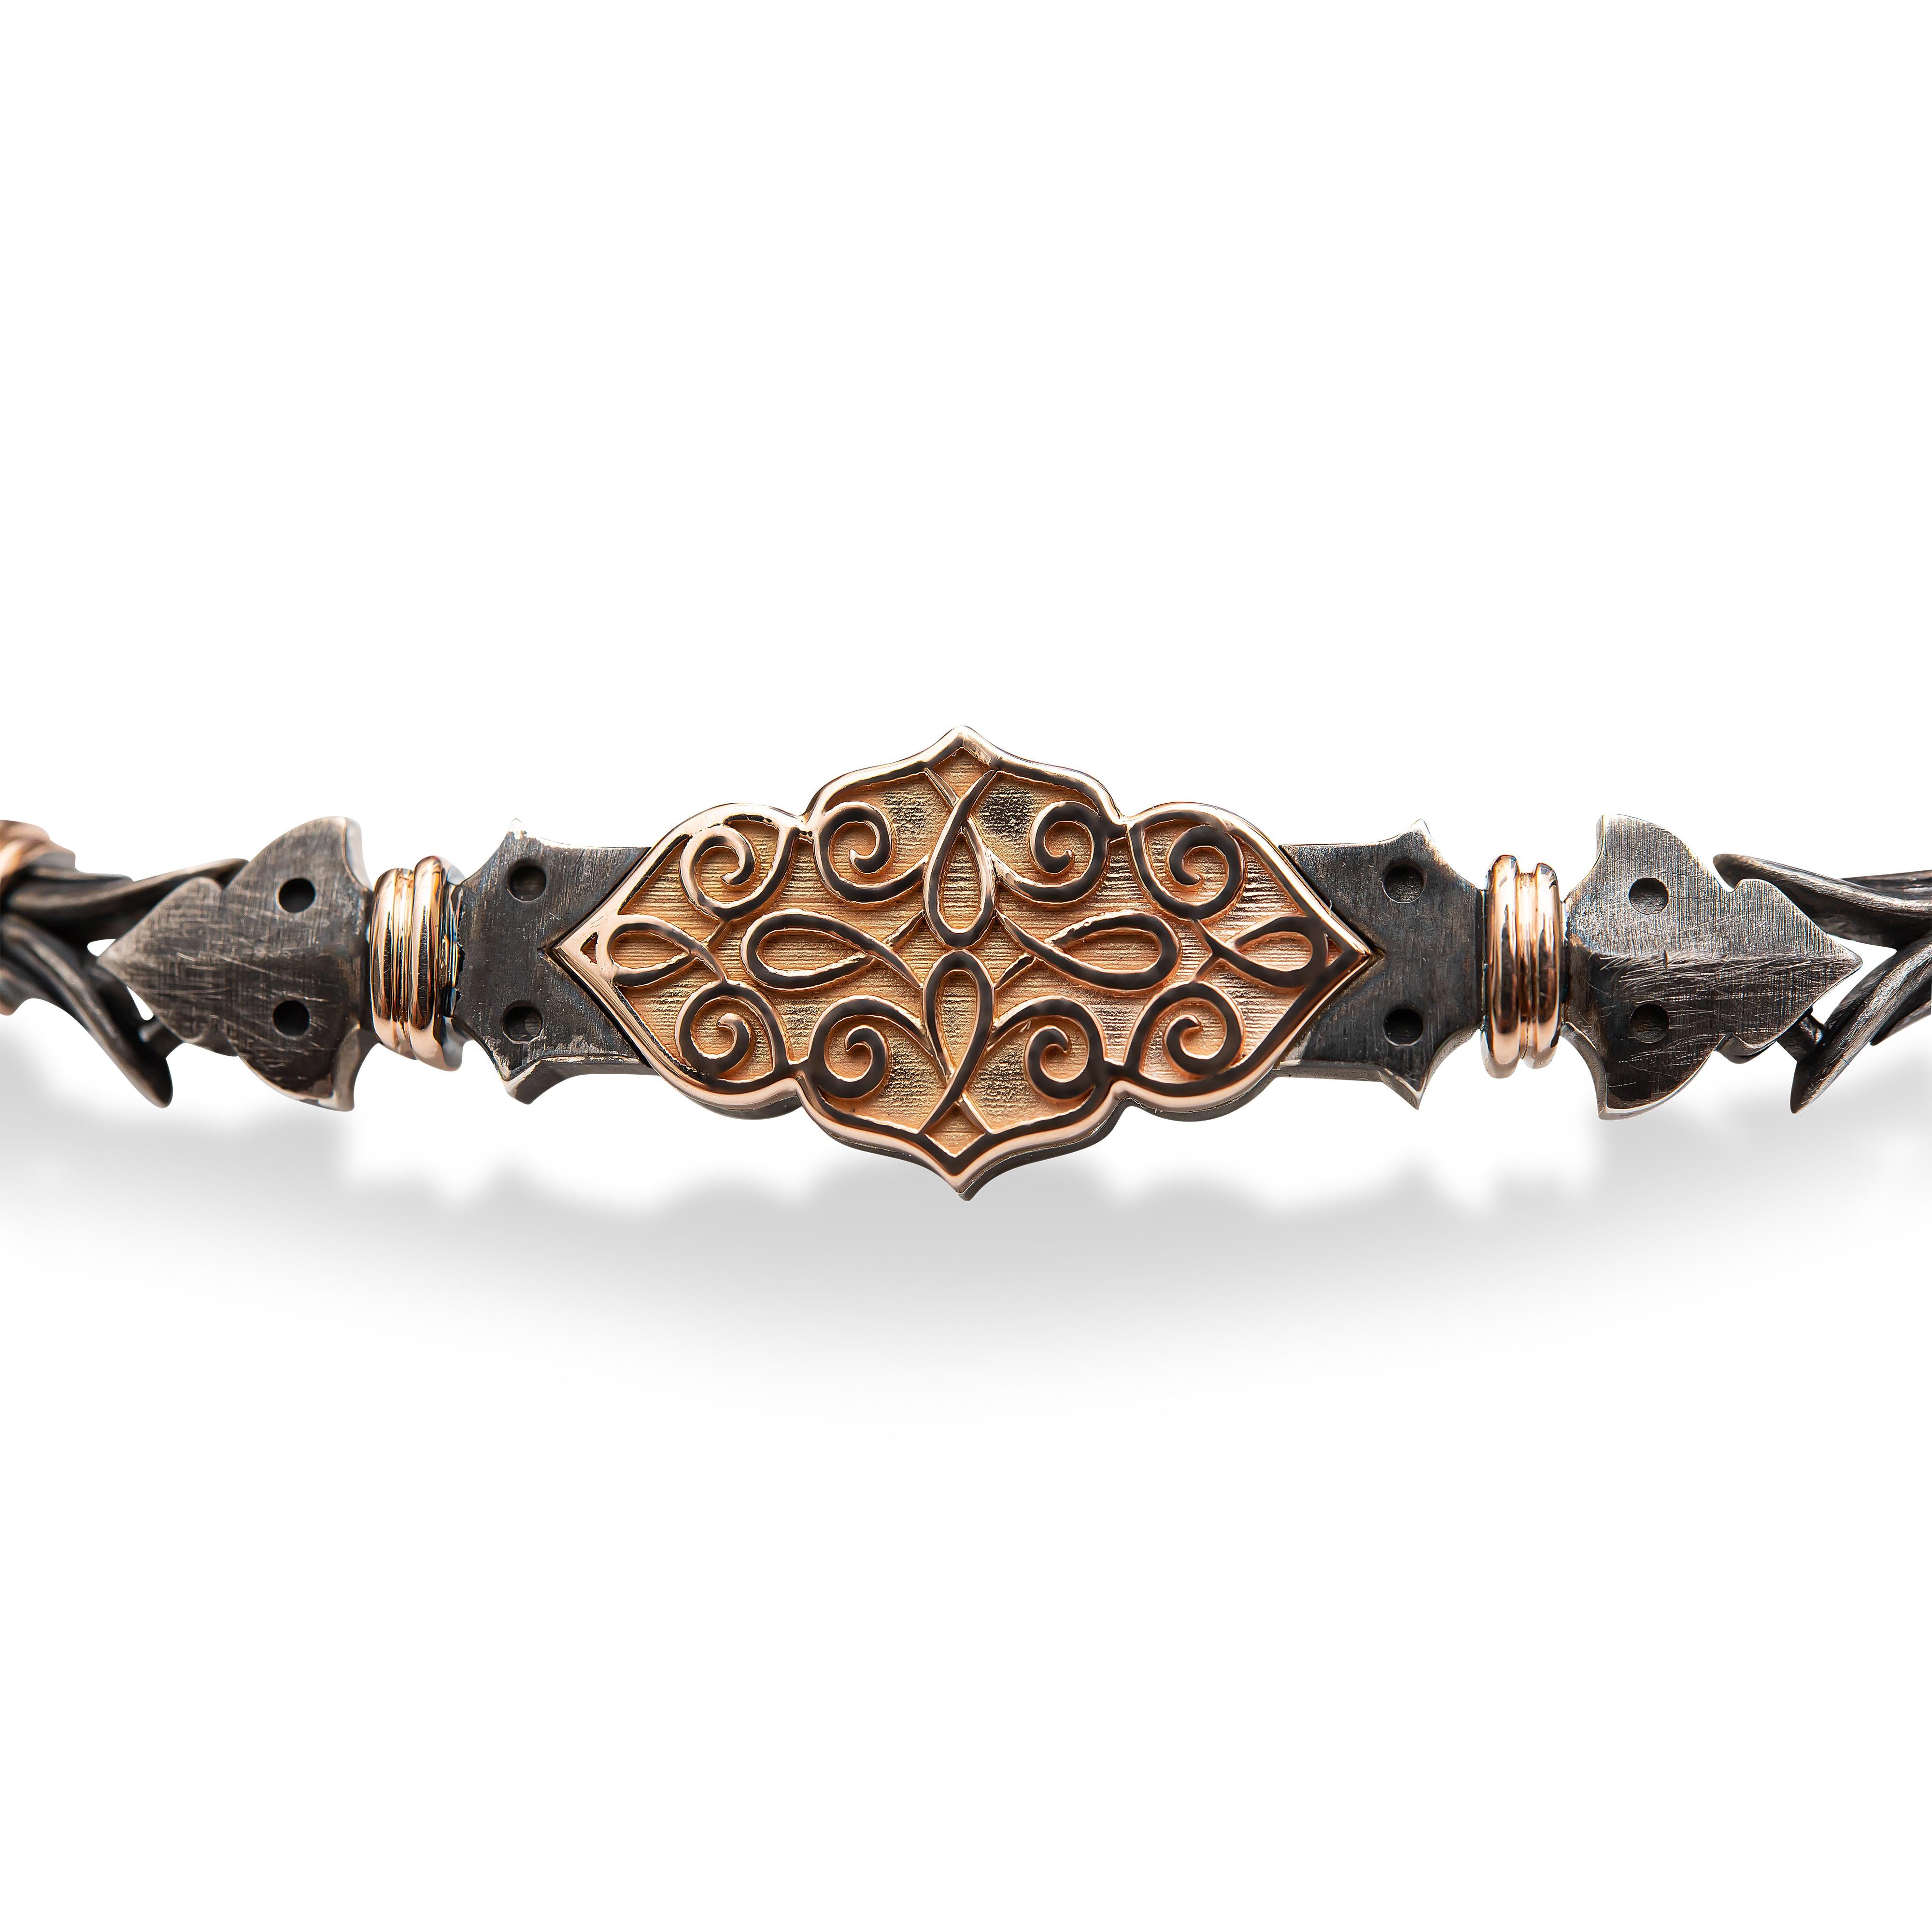 Say hello to this stunning handmade 14ct Rose Gold and Oxidized Sterling Silver, Filigree Pattern Work Linked Bracelet by Harlin Jones of New York. 

Bracelet Details: 
-19.5cm - 7.7 inches Length 
-11mm Width (Middle Rose Gold Section) 
-19mm x